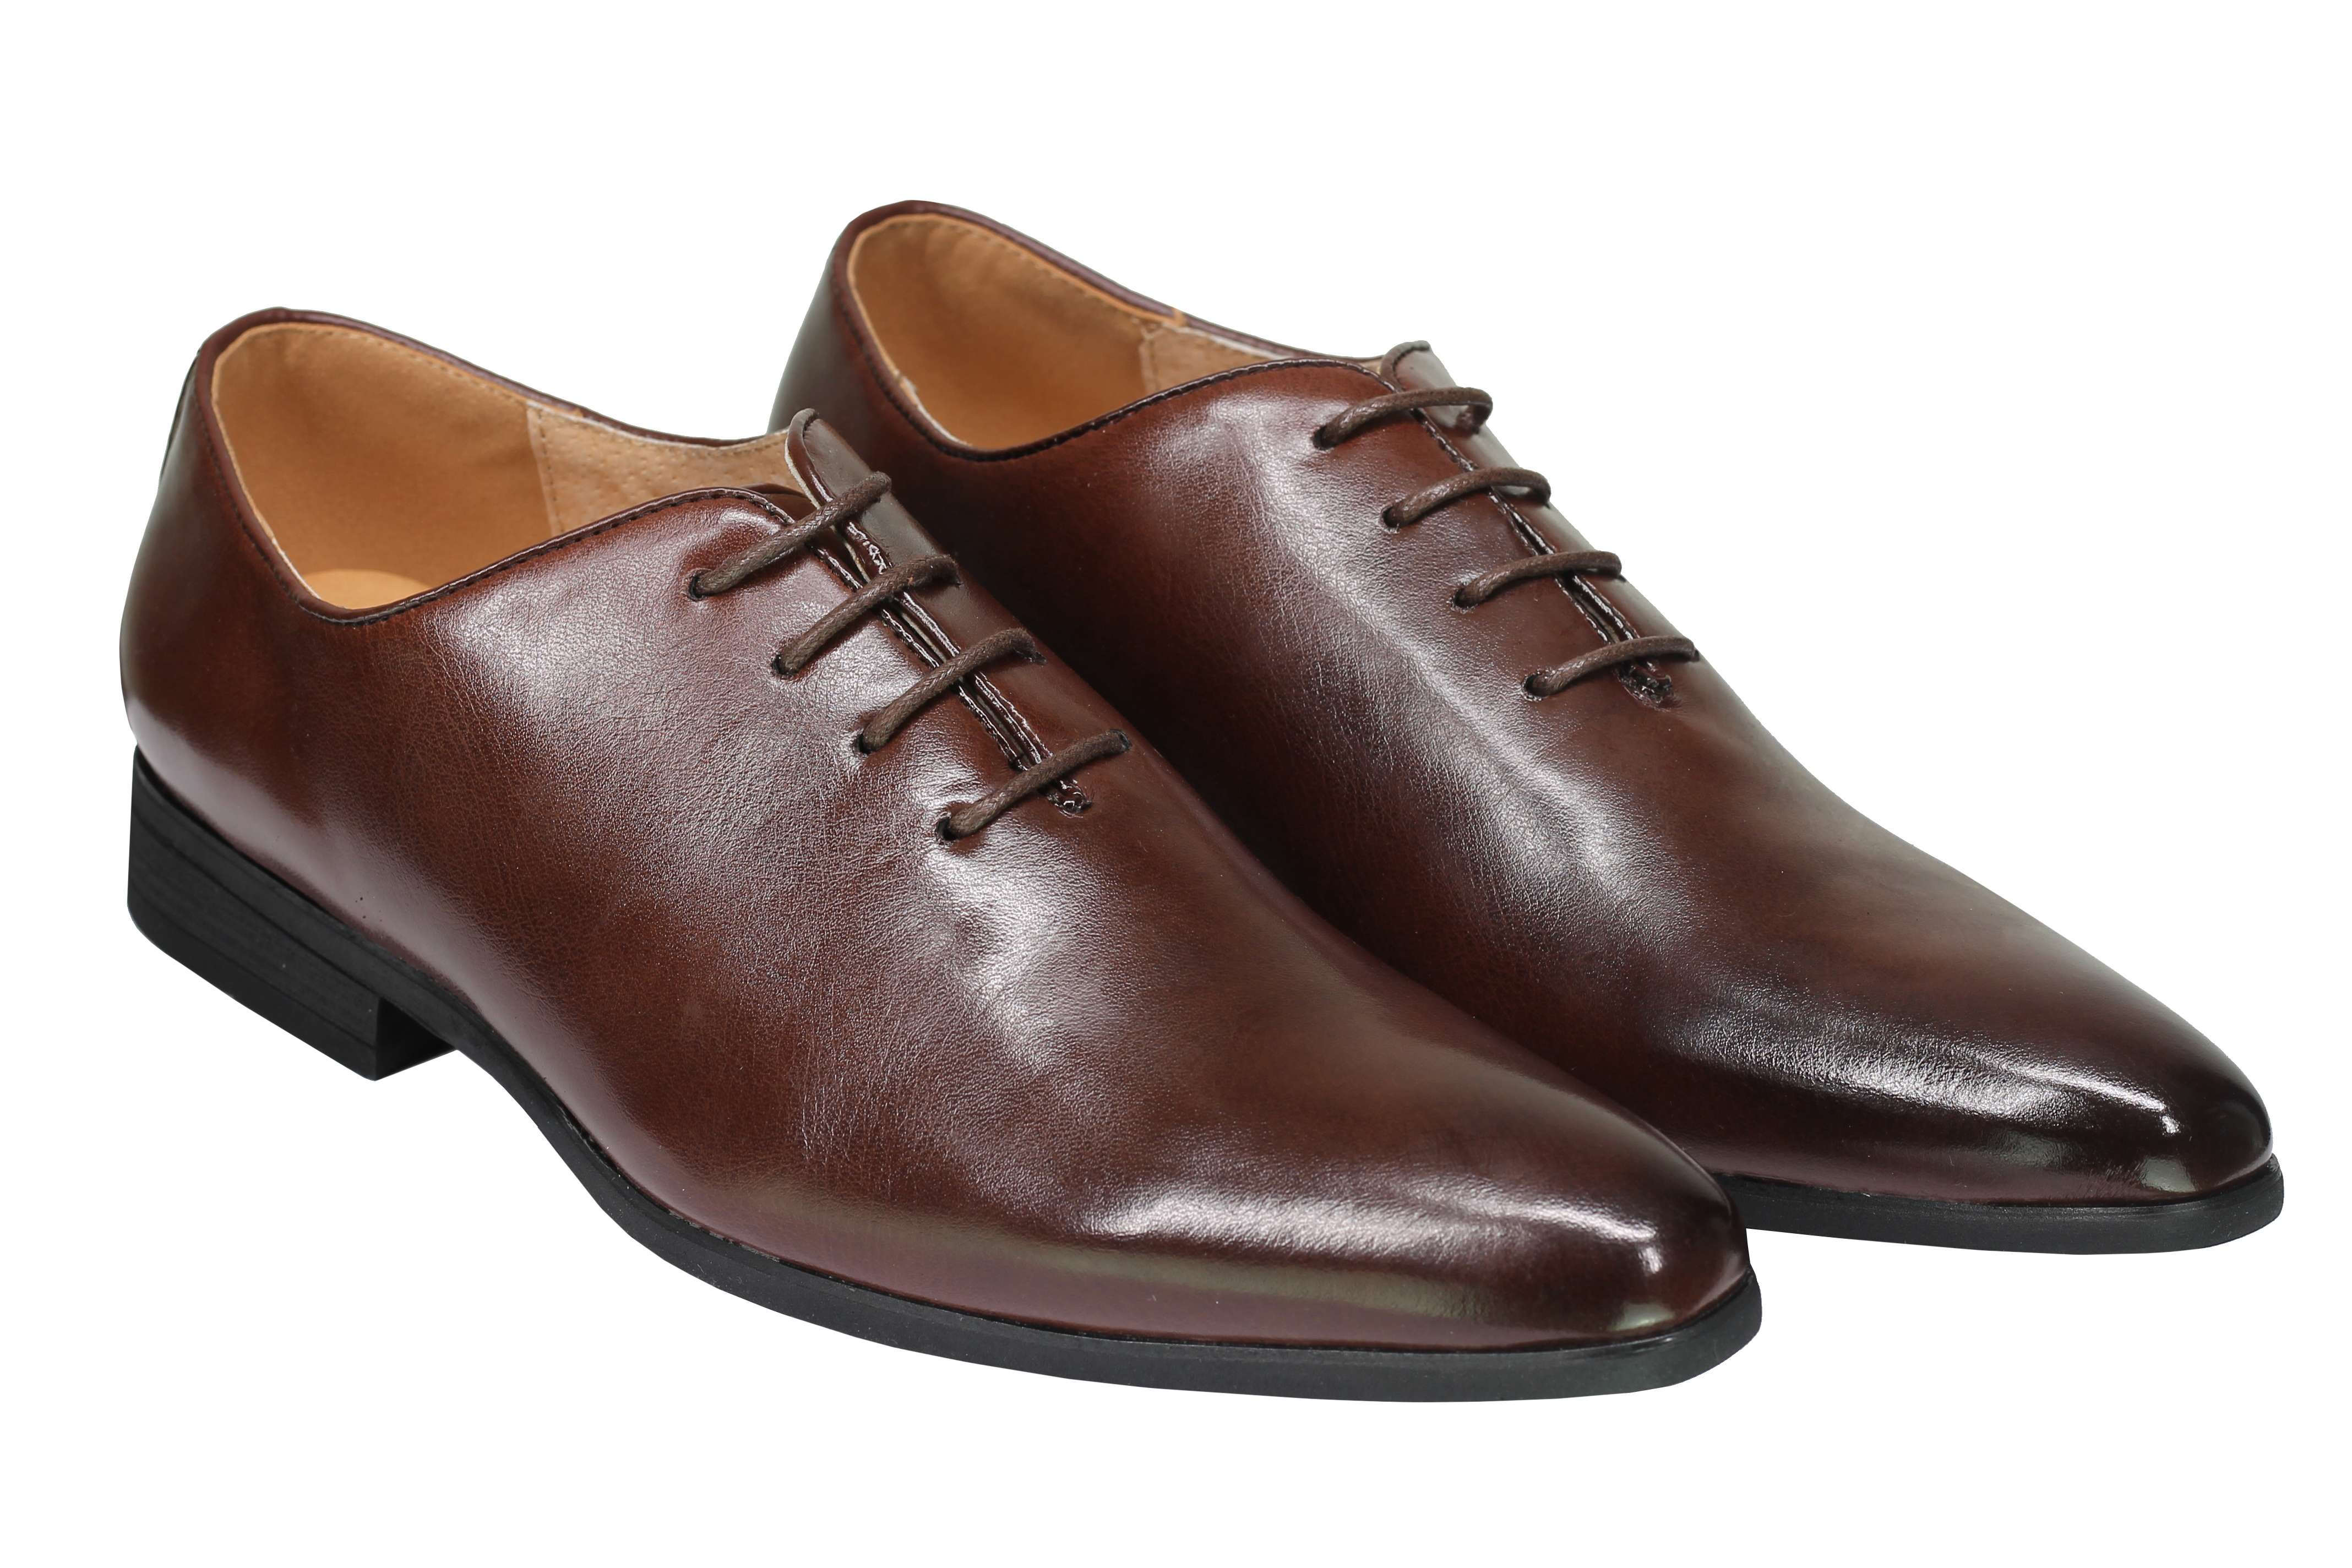 Faux Leather Upper Wholecut Oxford Shoes